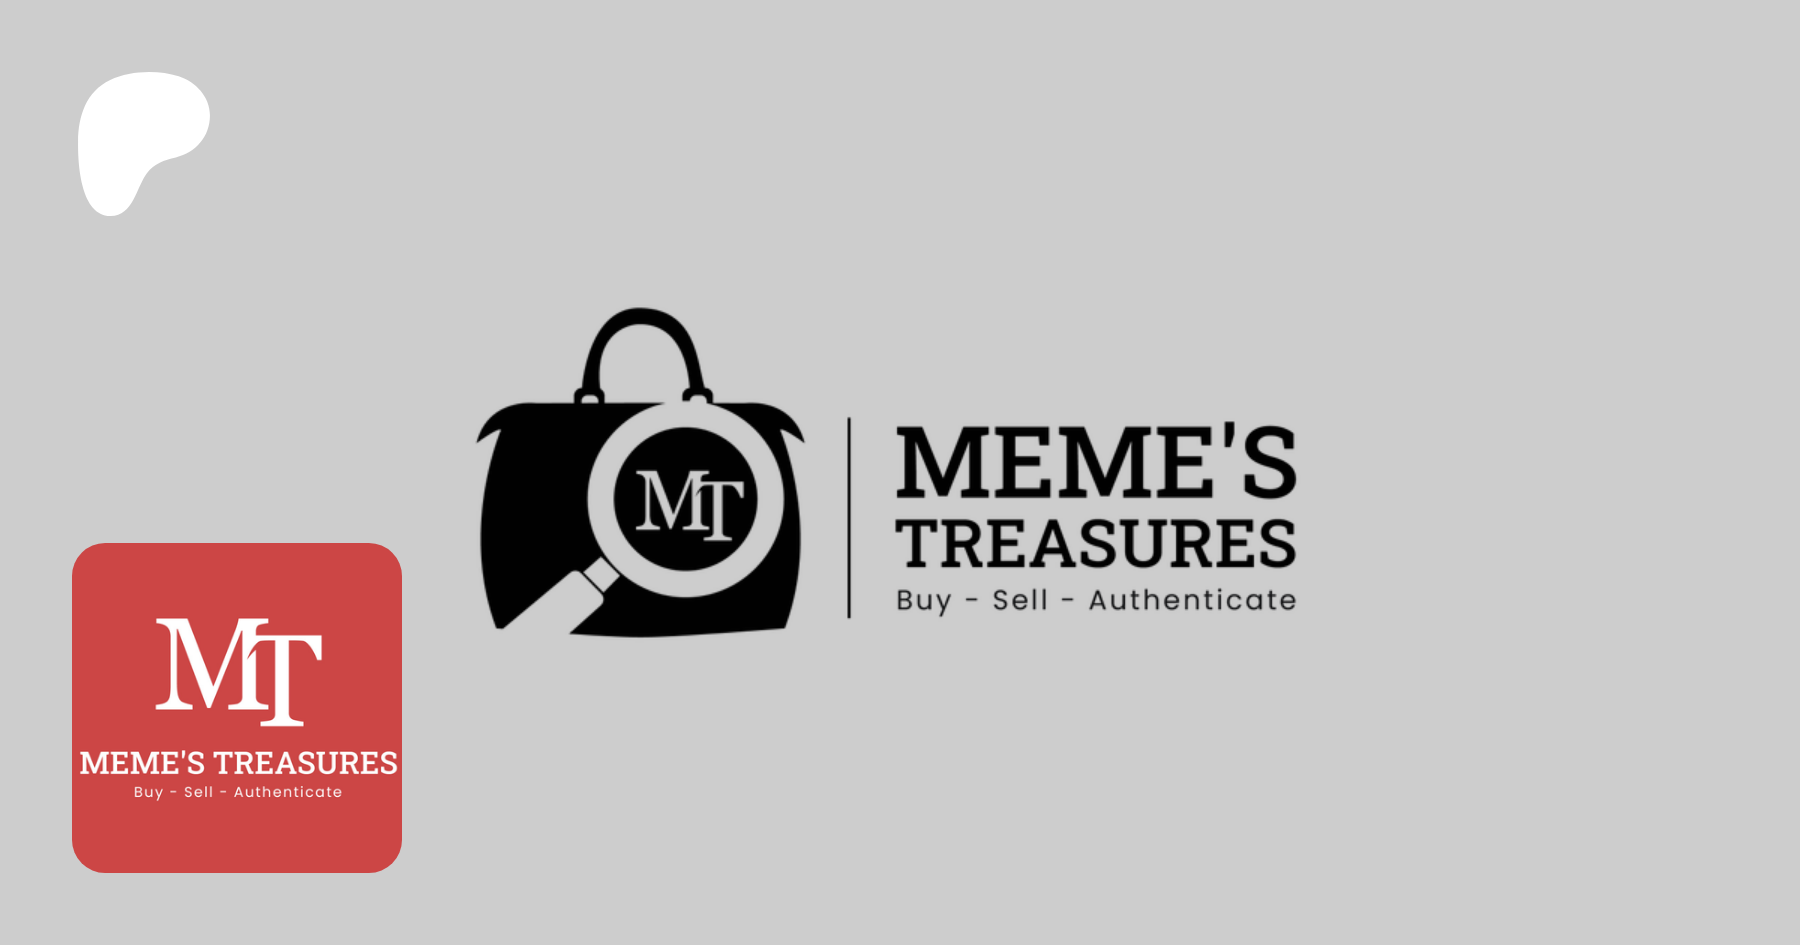 Introduc - Memes Treasures Sales and Authentication Service